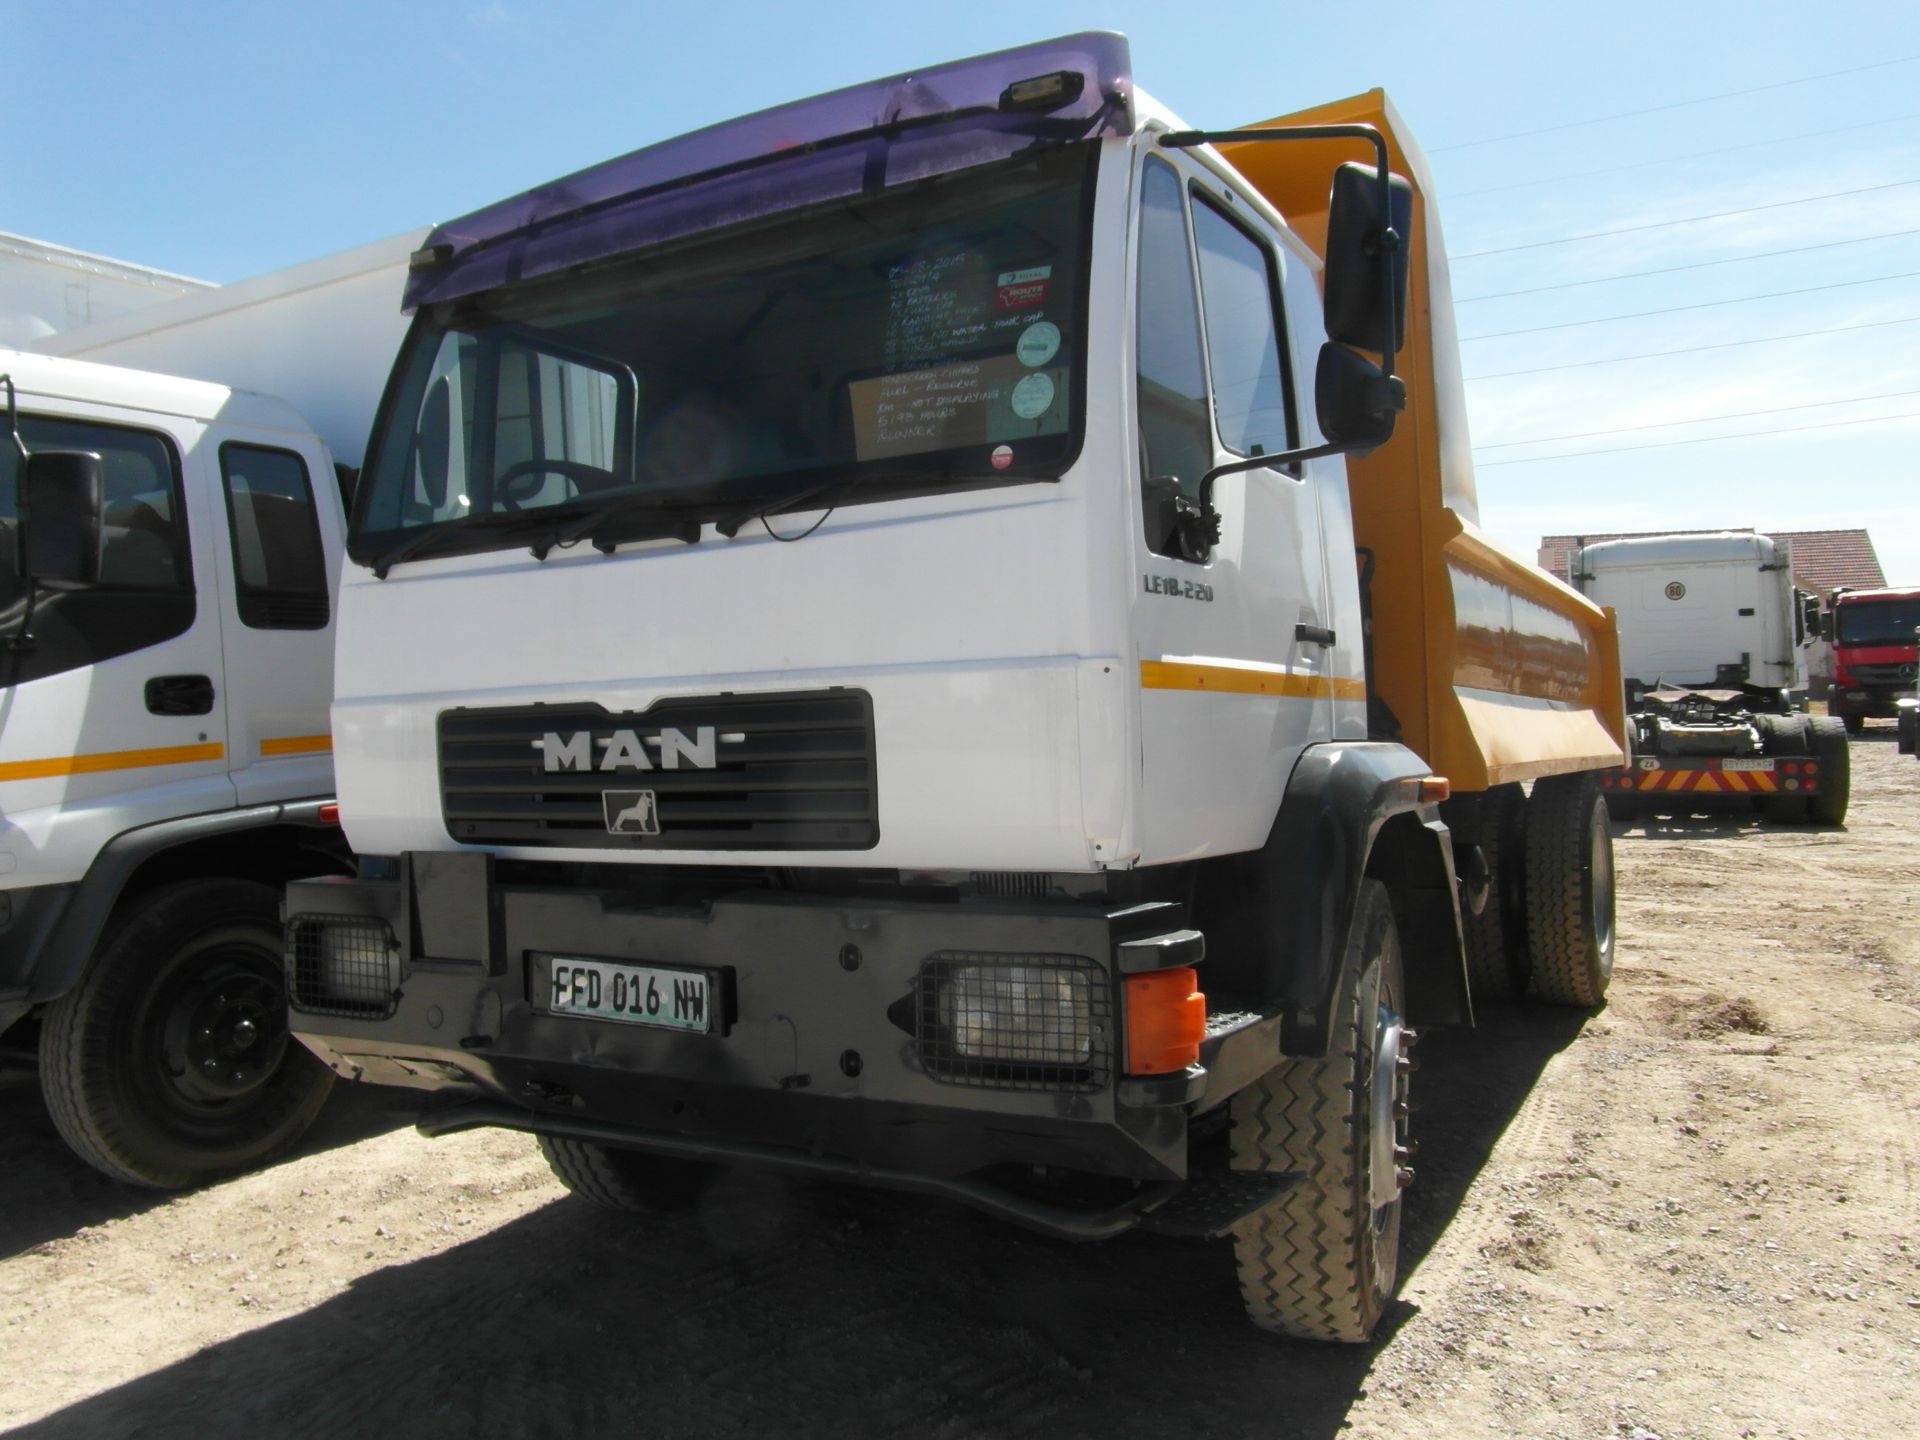 2003 FFD016NW MAN LE18.220 6m³ Tipper Truck (Vin No: AAML641009PX10313 ) - Image 2 of 4